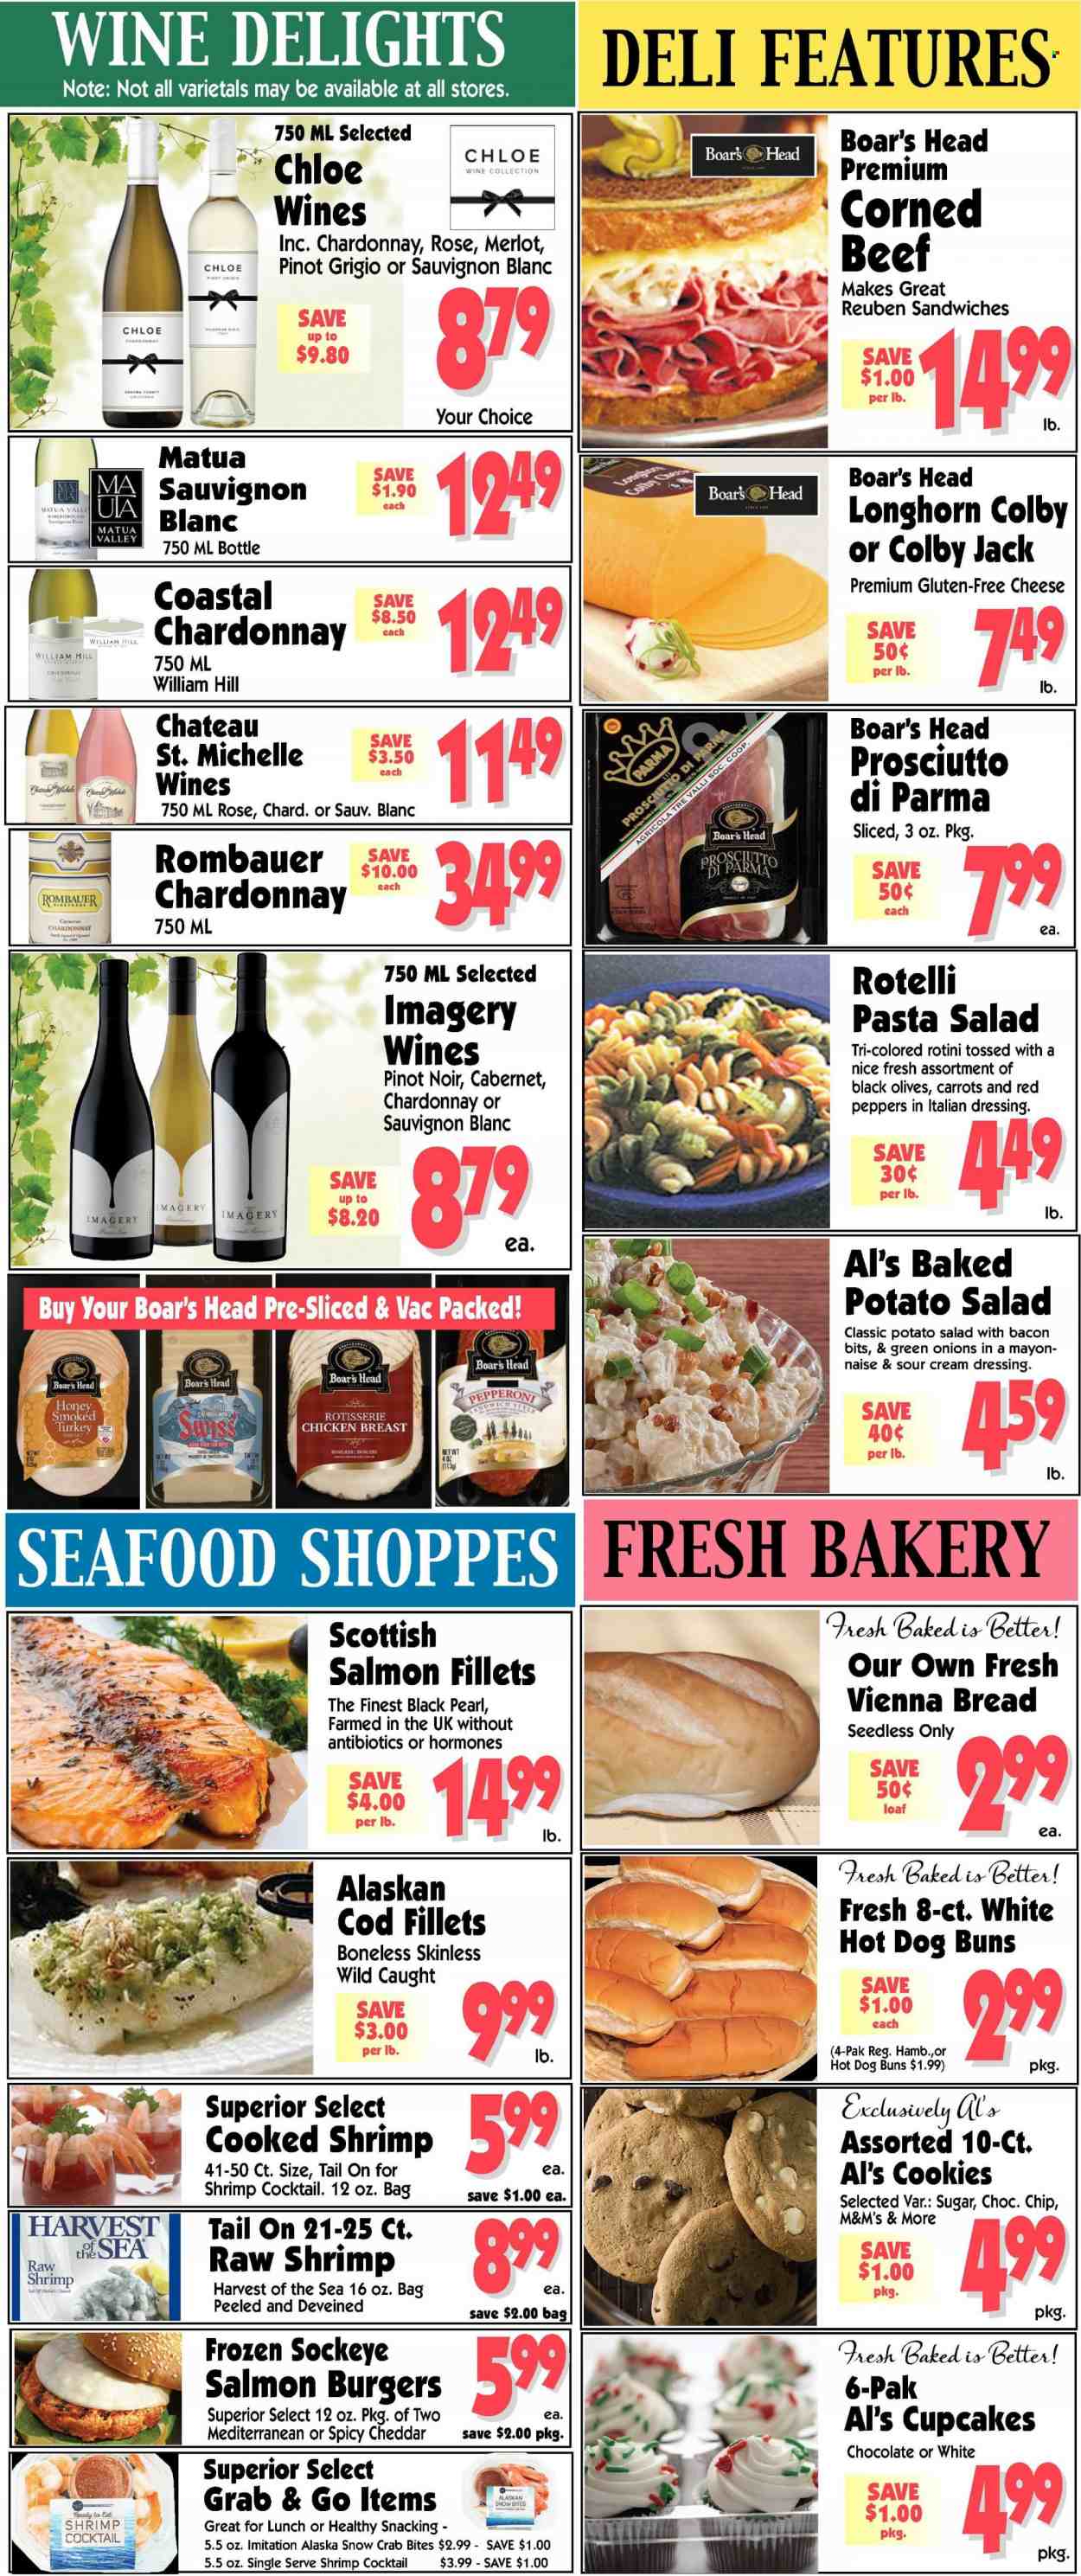 thumbnail - Al's Supermarket Flyer - 08/10/2022 - 08/16/2022 - Sales products - bread, buns, cupcake, carrots, salad, peppers, red peppers, cod, salmon, salmon fillet, seafood, crab, shrimps, sandwich, hamburger, pasta, prosciutto, bacon bits, pepperoni, potato salad, pasta salad, corned beef, Colby cheese, Longhorn cheese, cheddar, italian dressing, cookies, chocolate, M&M's, sugar, olives, dressing, honey, Cabernet Sauvignon, red wine, white wine, Chardonnay, wine, Merlot, Pinot Noir, Pinot Grigio, Sauvignon Blanc, rosé wine, chicken breasts, beef meat, chard. Page 3.